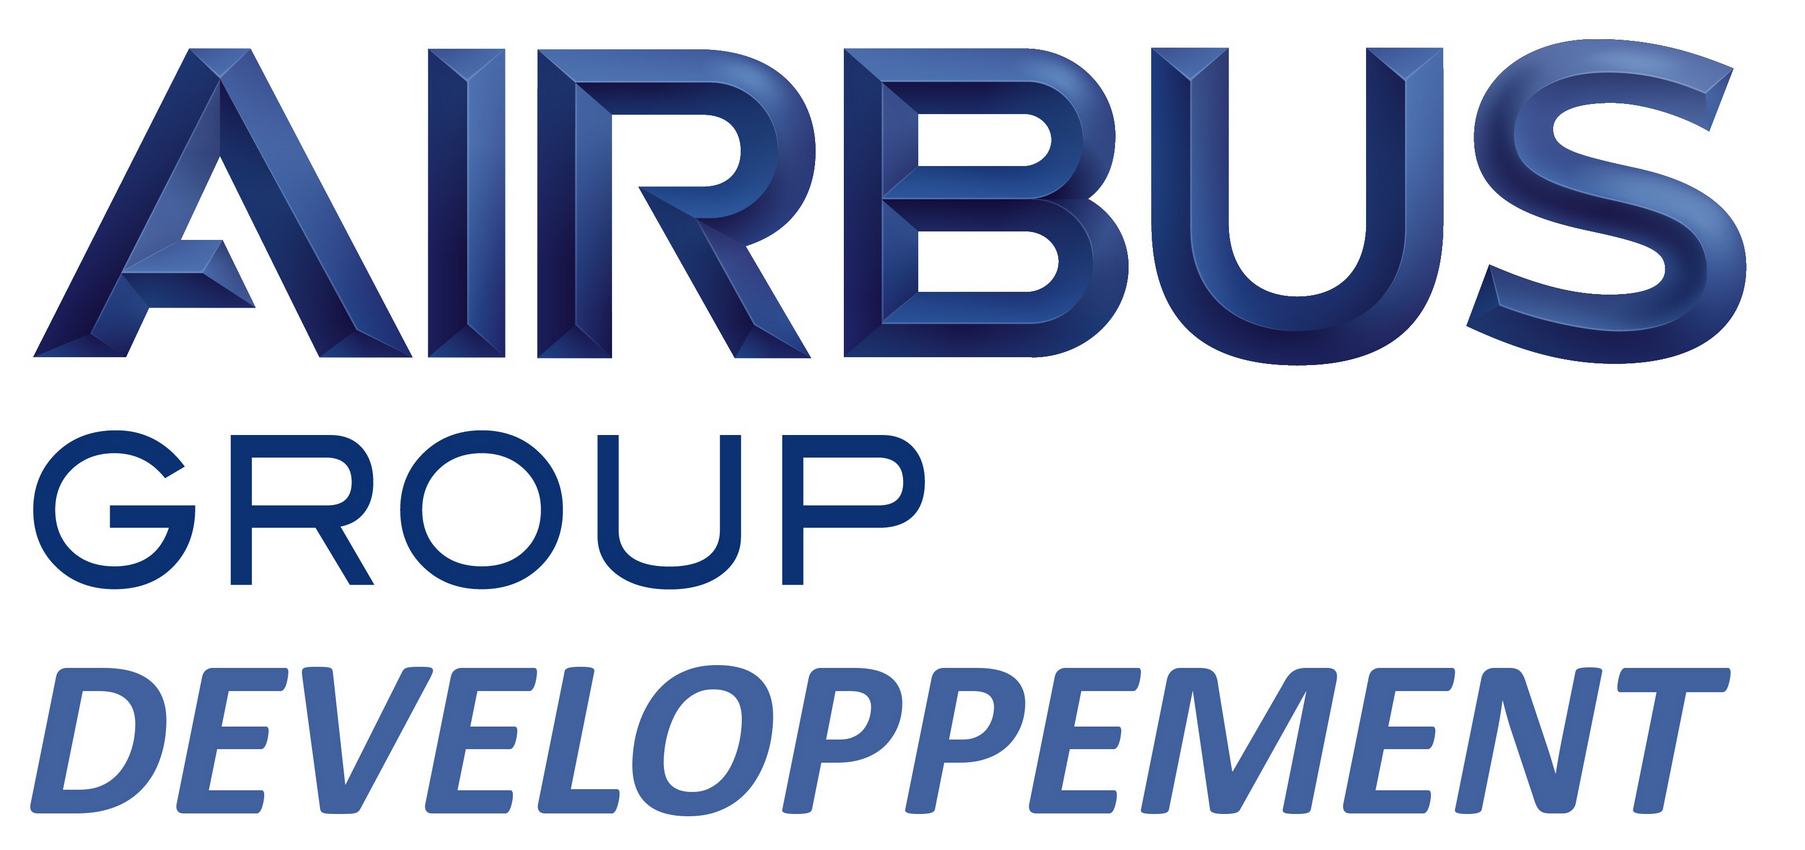 AIRBUS Group Developpement